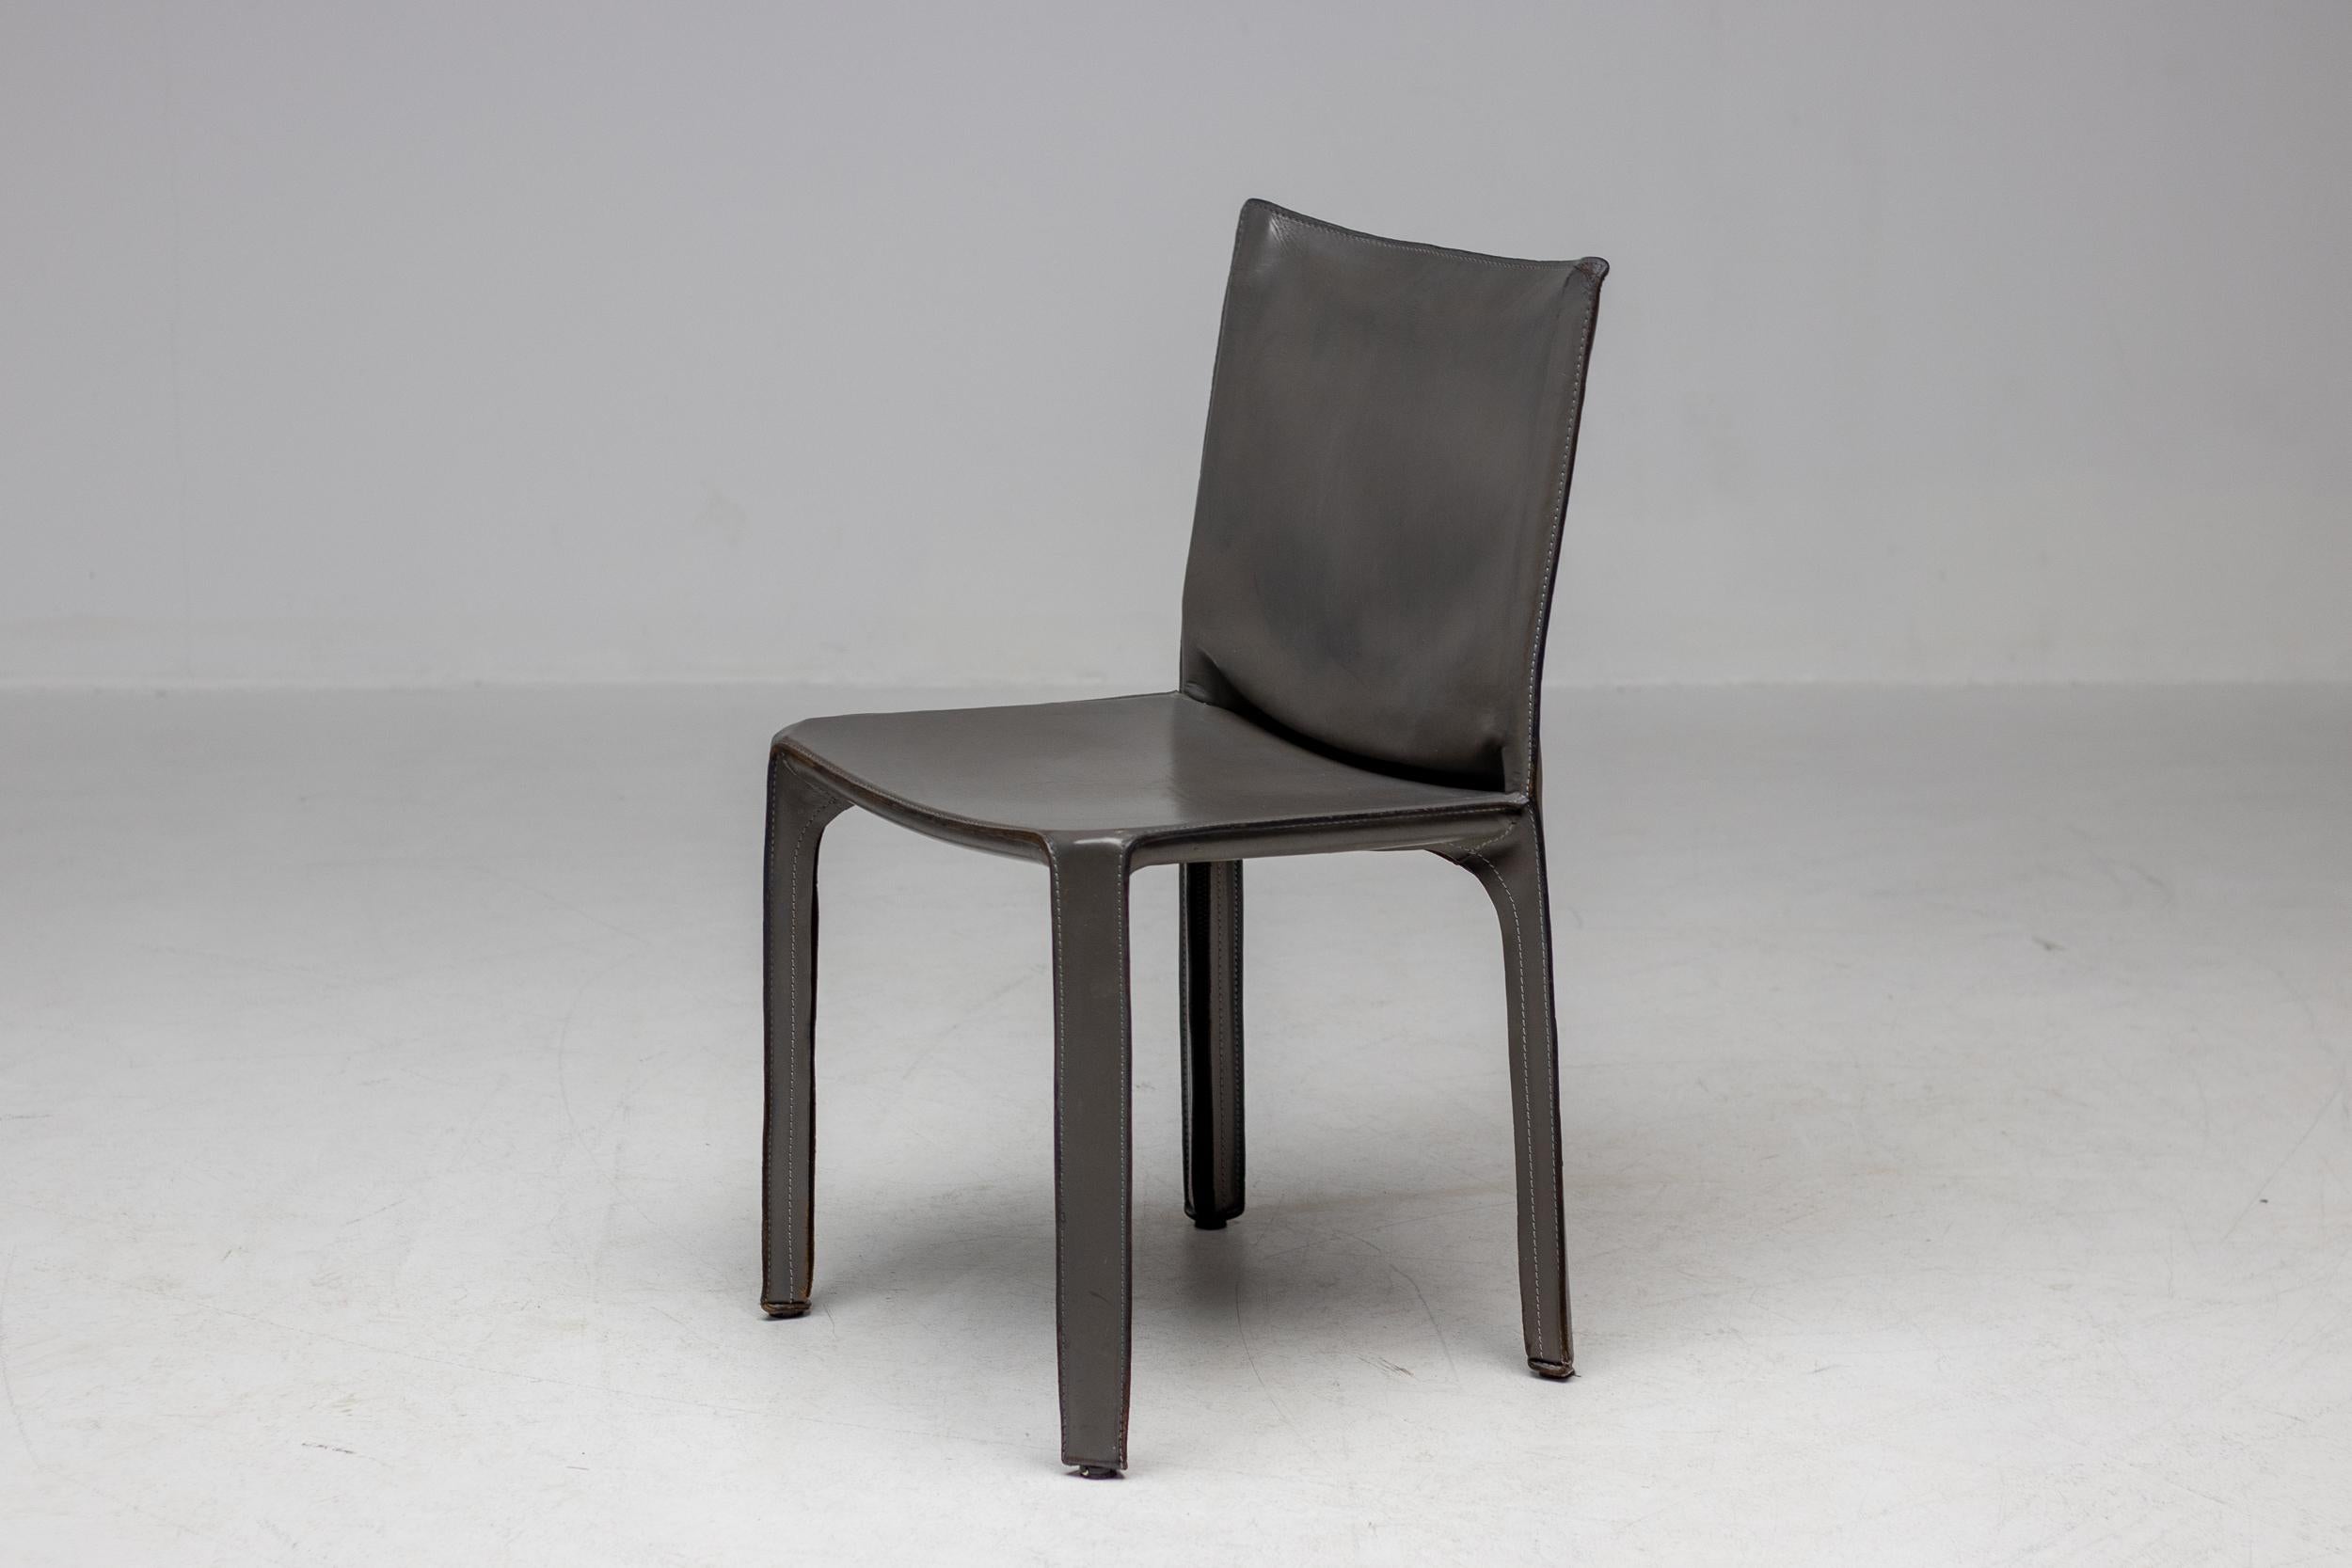 Iconic elephant hide grey leather CAB dining chairs designed by Mario Bellini in 1977 for Cassina.
Very early examples with thin flat seat bottom instead of the later thick bottom in nice vintage condition. 

The Cab chair provides remarkable